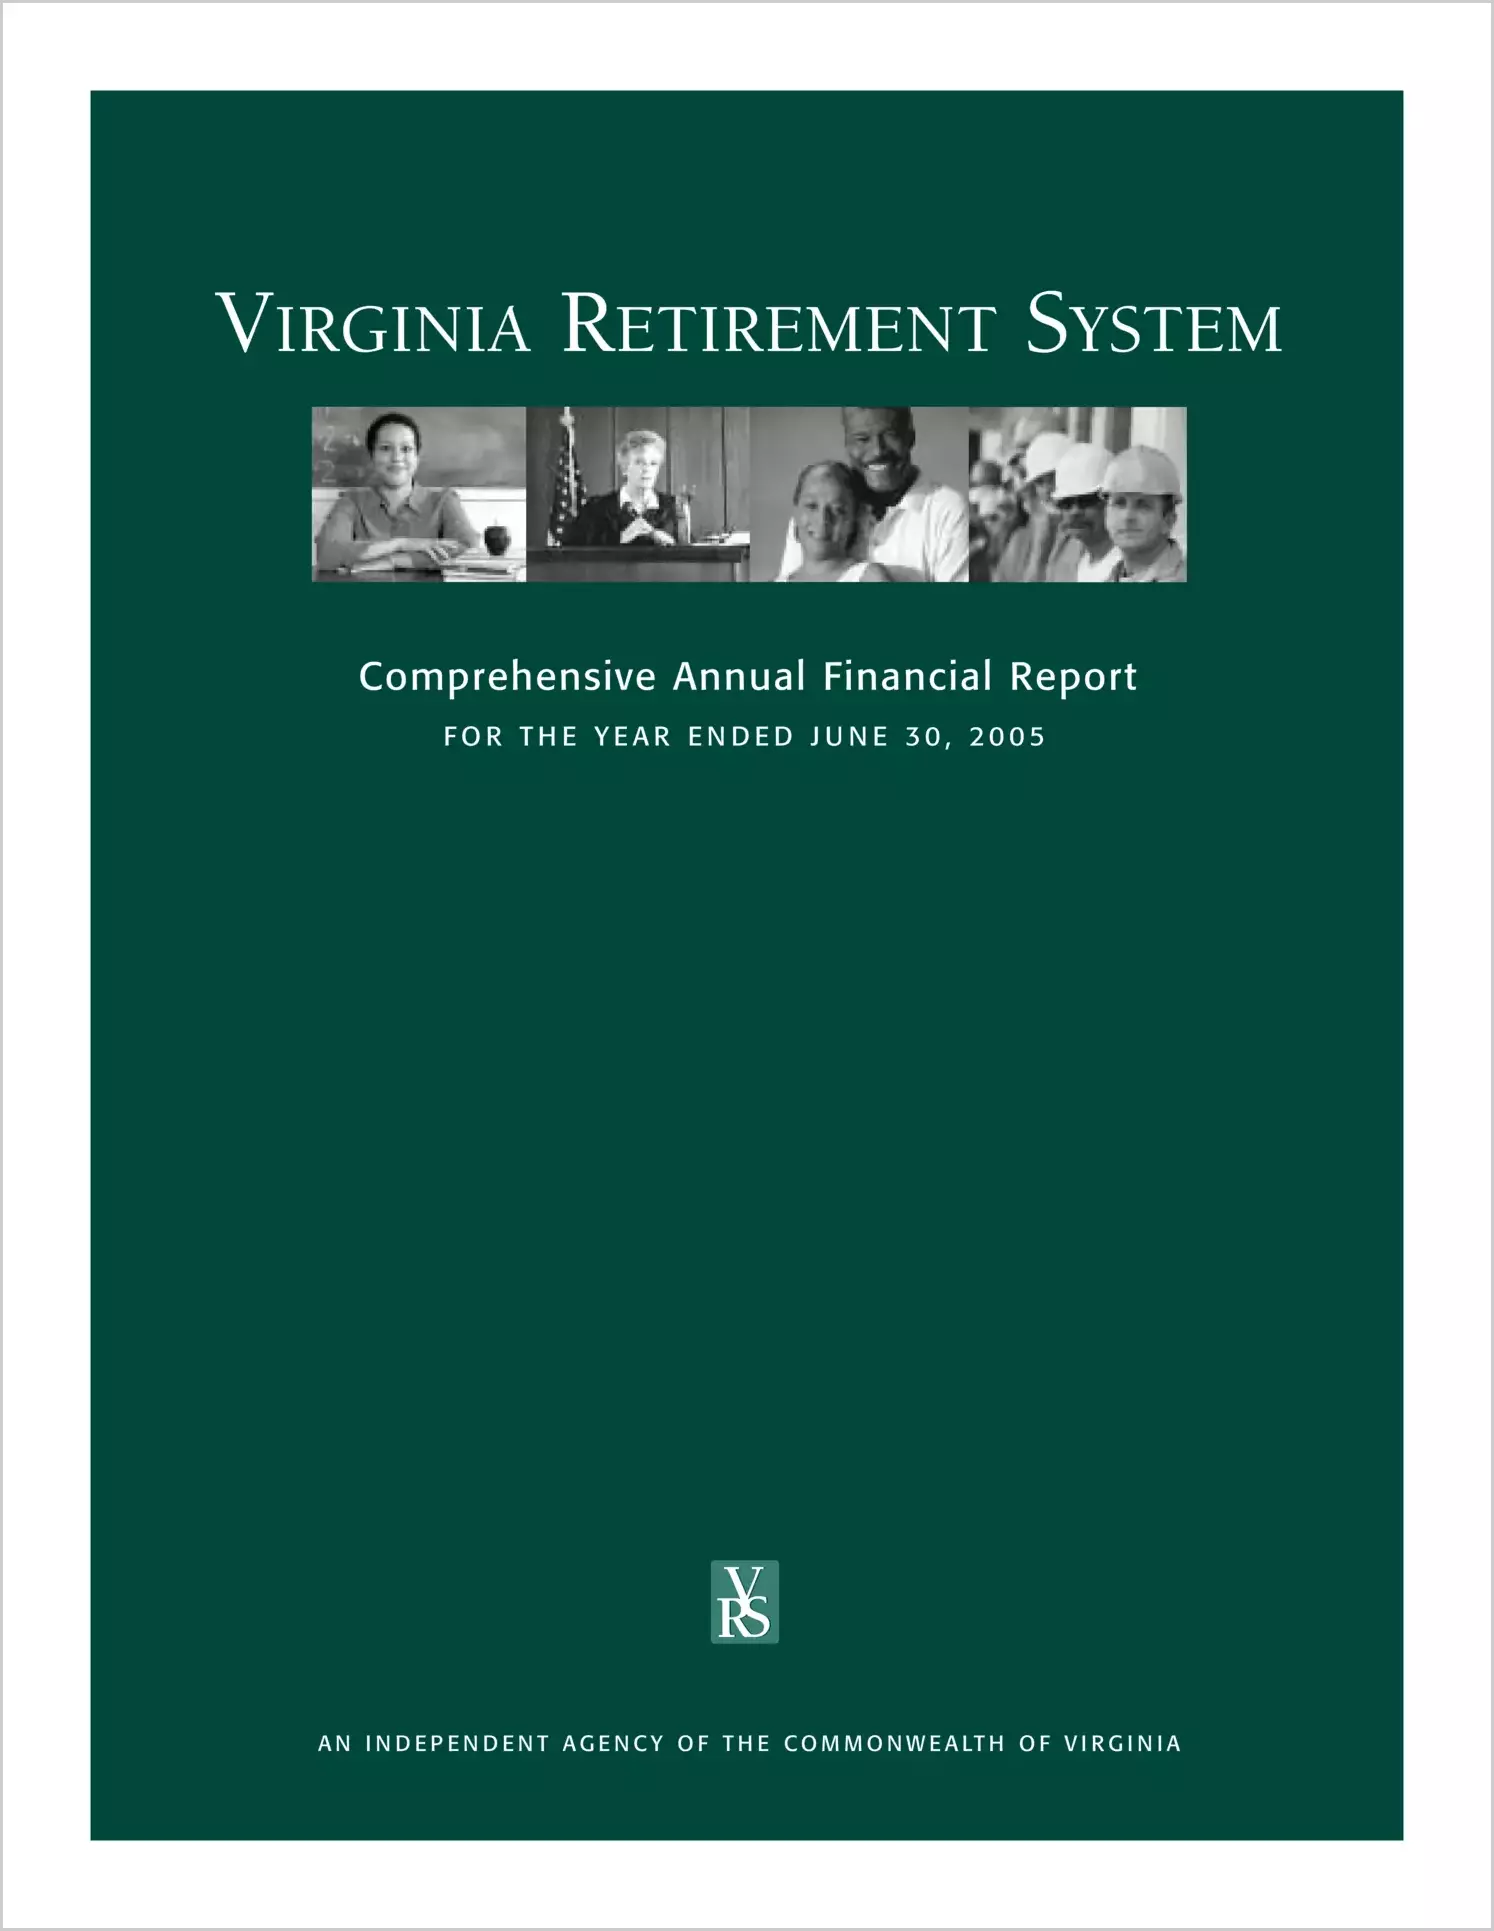 Virginia Retirement System Annual Report for the year ended June 30, 2005